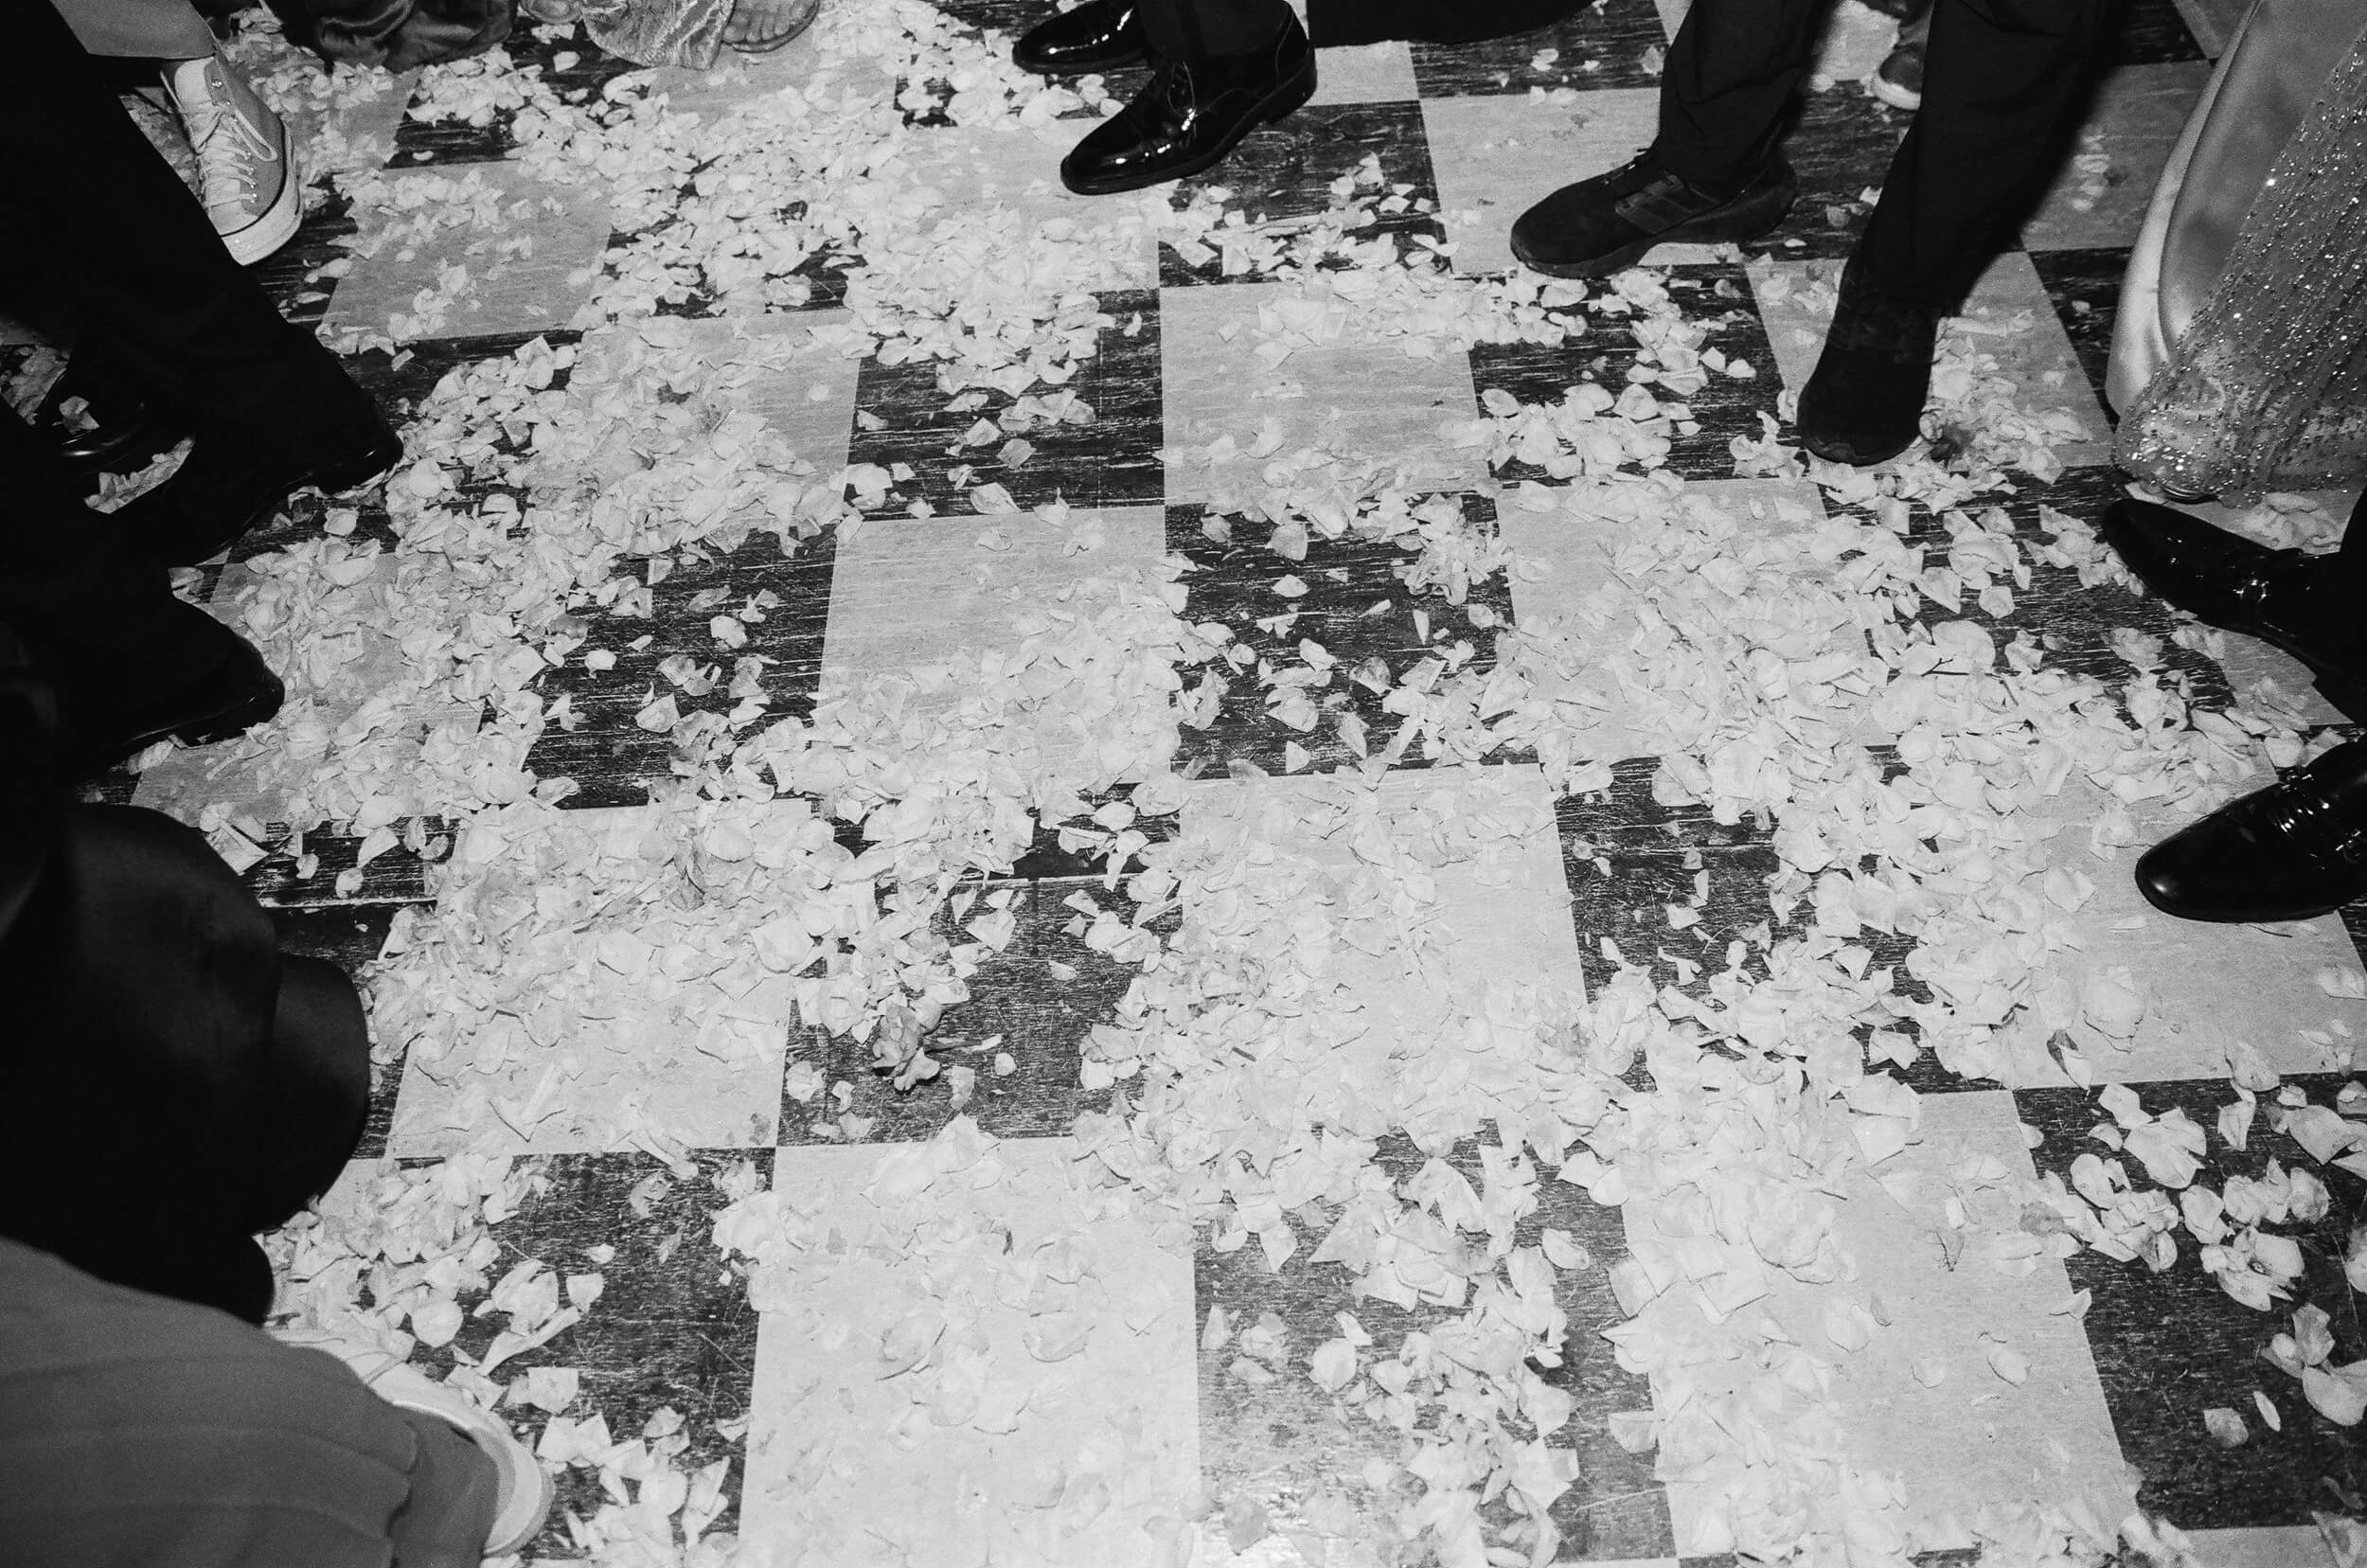 Black and white shot of flower petals on the dance floor